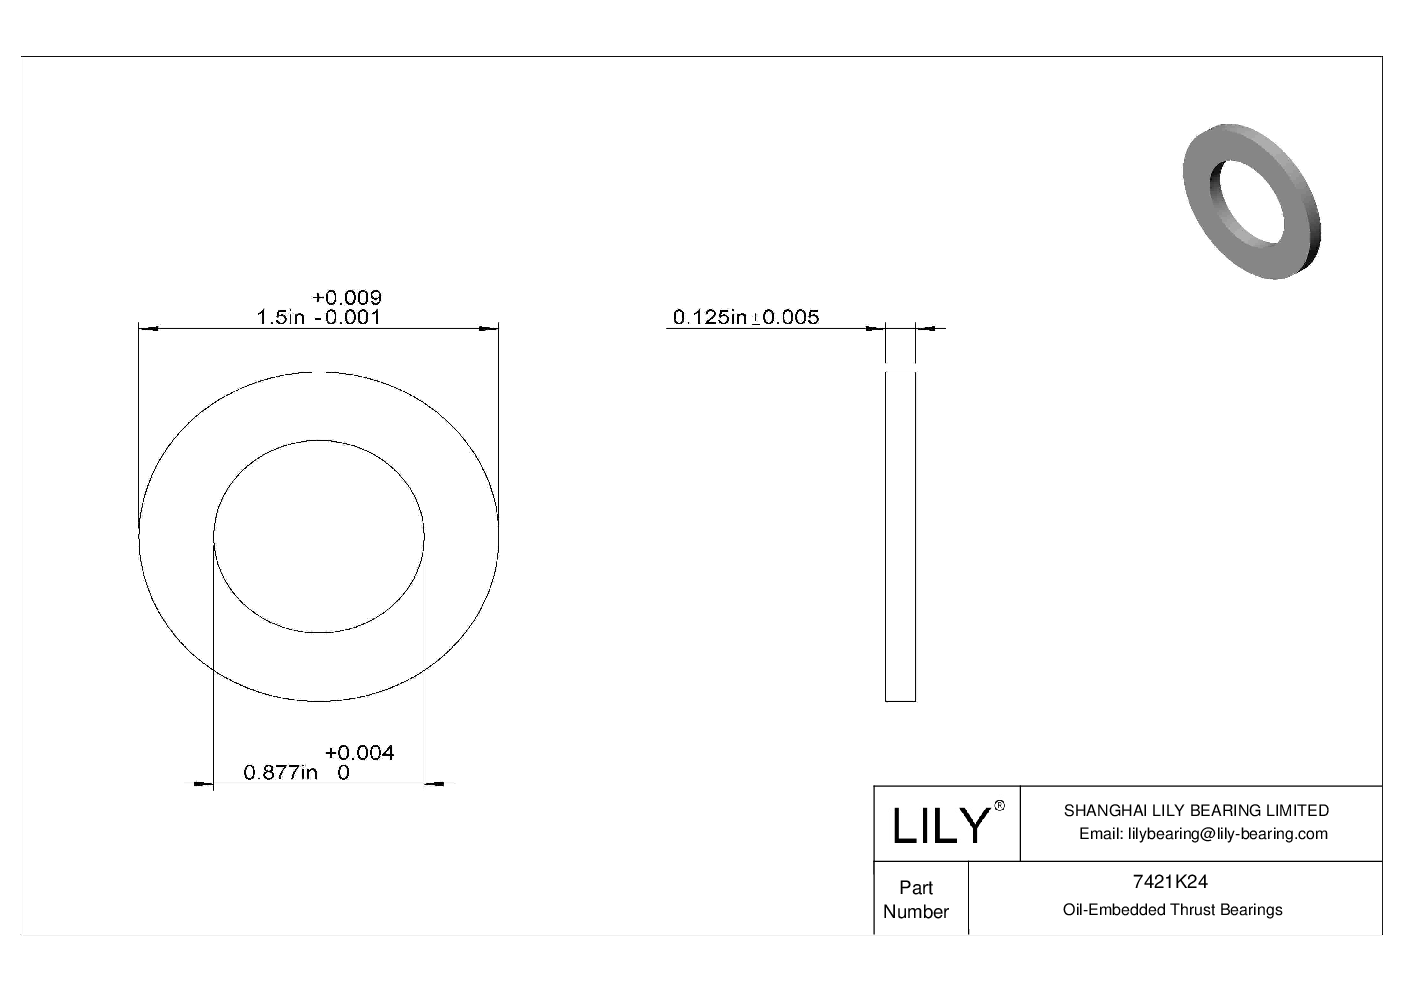 HECBKCE Ultra-Low-Friction Oil-Embedded Thrust Bearings cad drawing